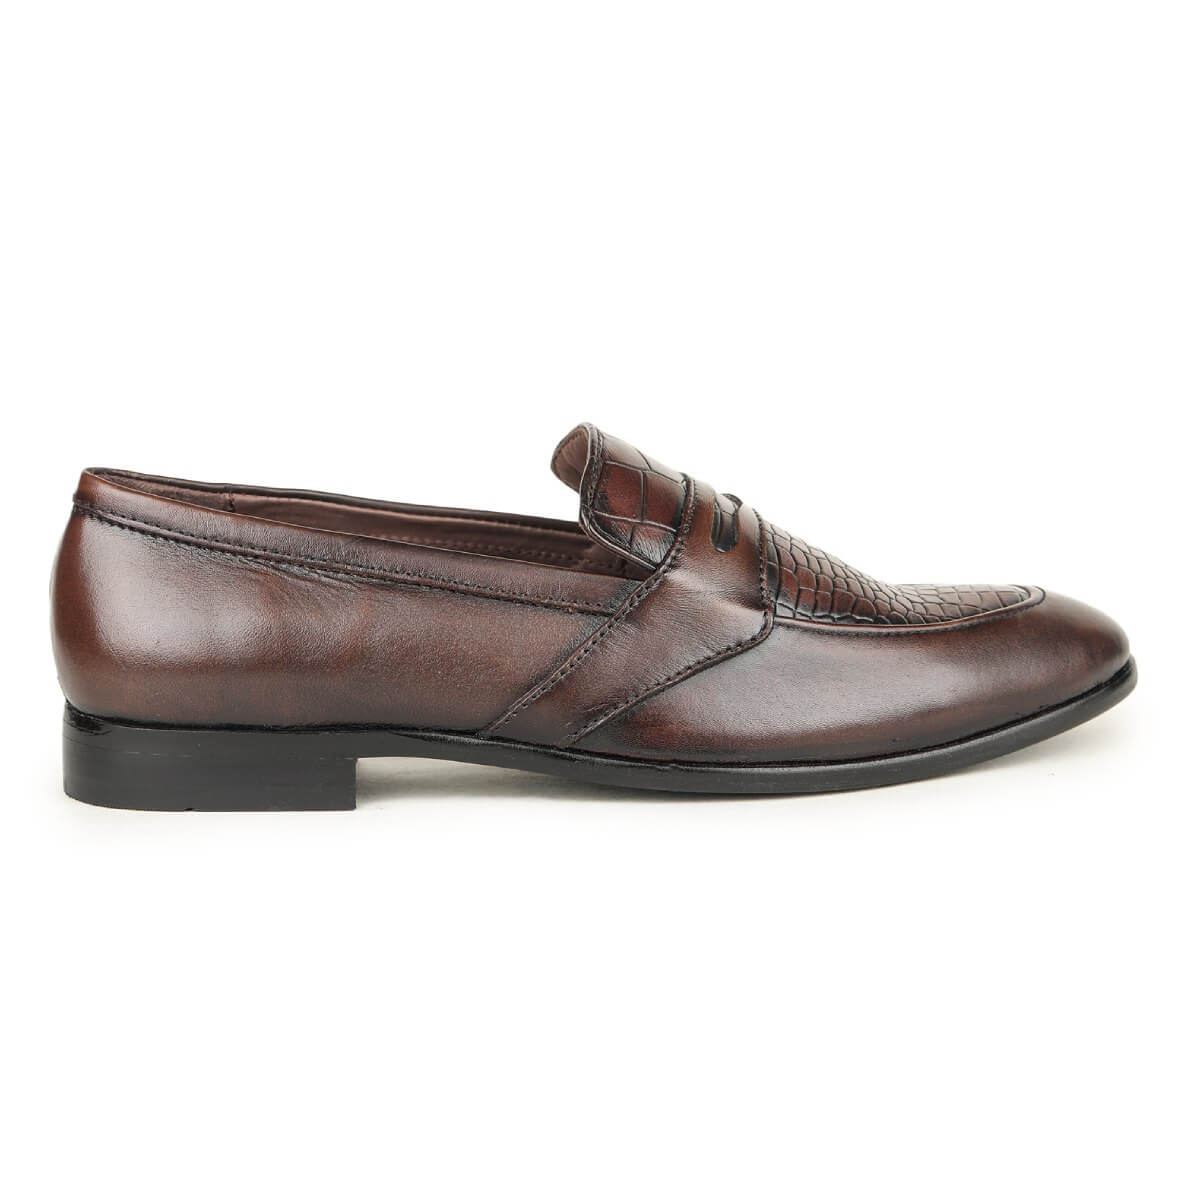 textured brown slip on formal shoes